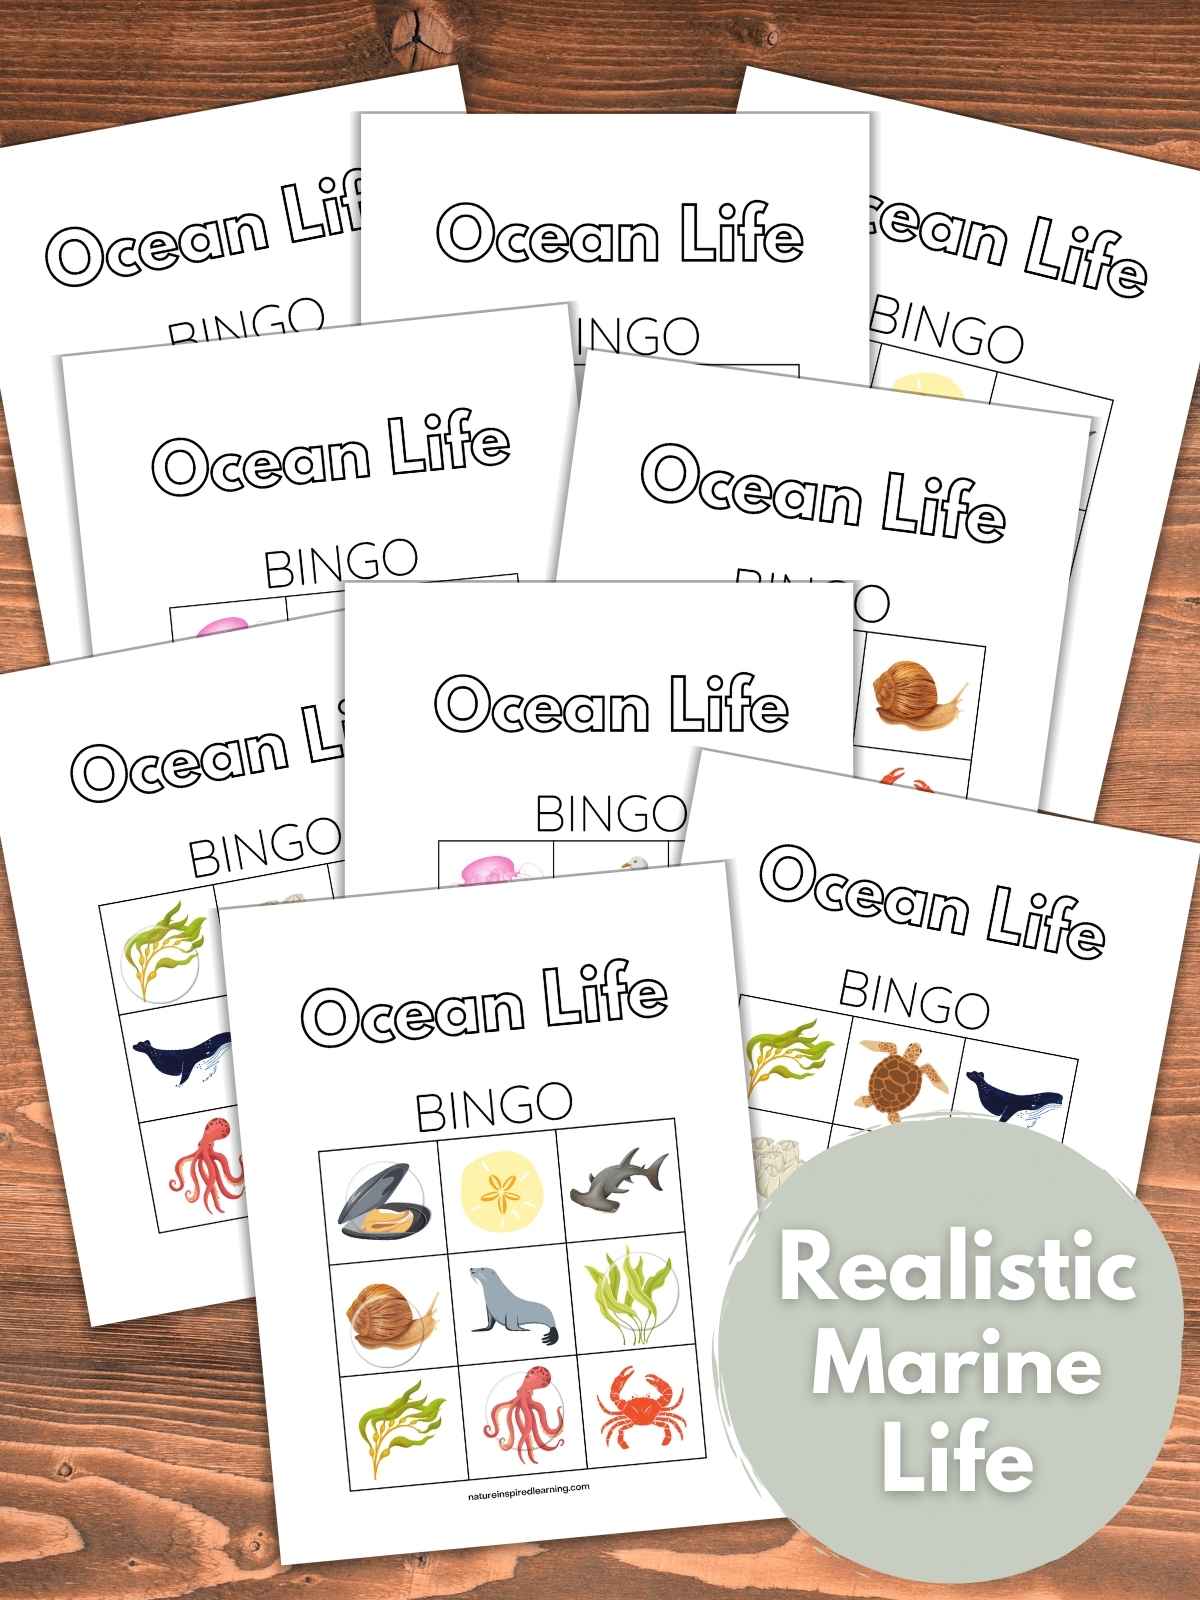 nine printable bingo game sheets with images of ocean animals and plants overlapping on a wooden back gorund. Gray circle bottom right with text overlay.